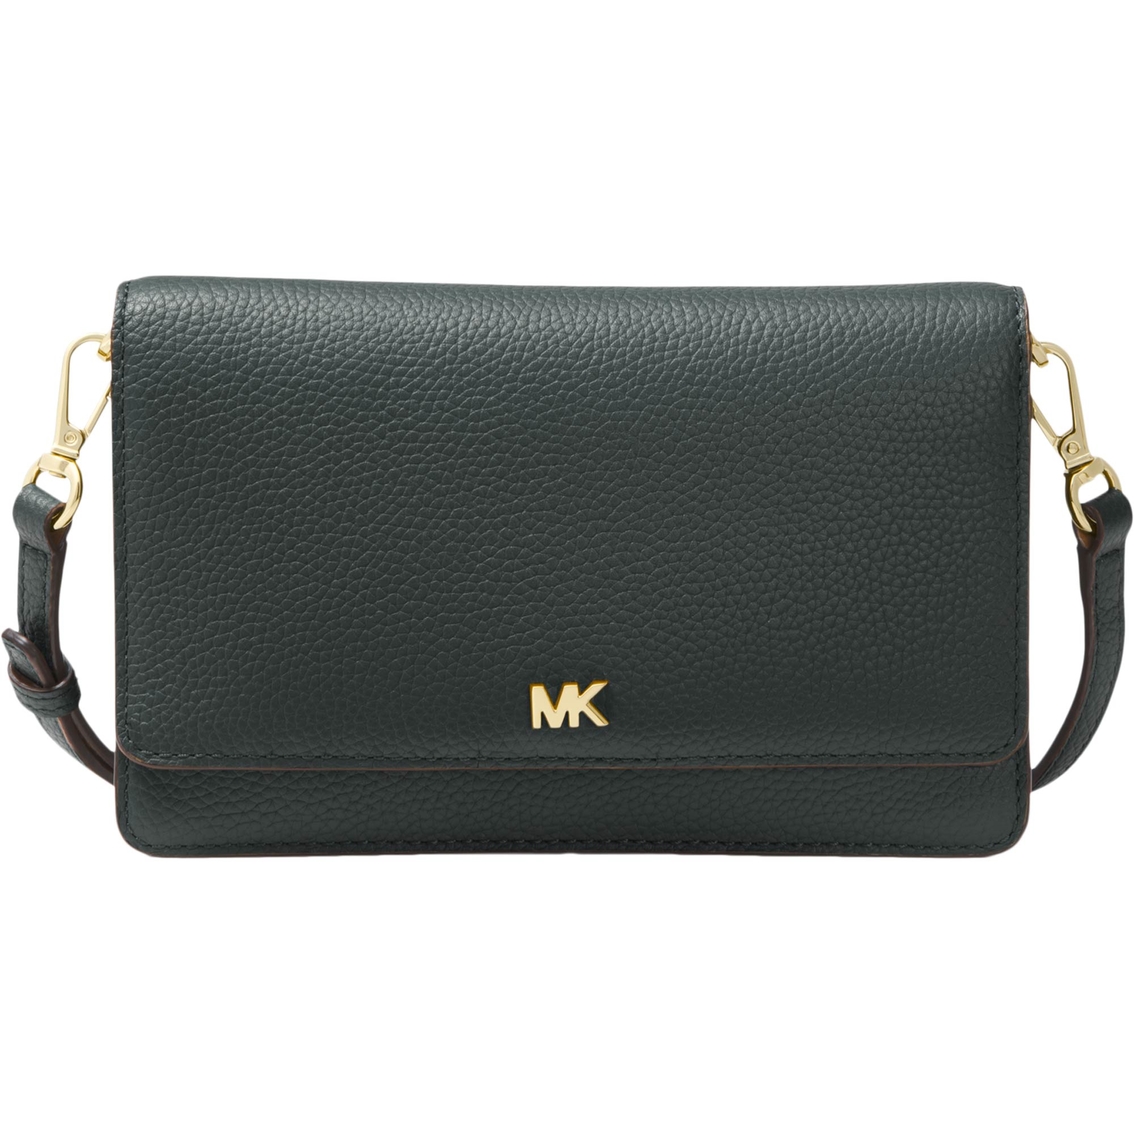 Michael Kors Pebbled Leather Convertible Crossbody Bag | Cell Phone Cases | Back To School Shop ...